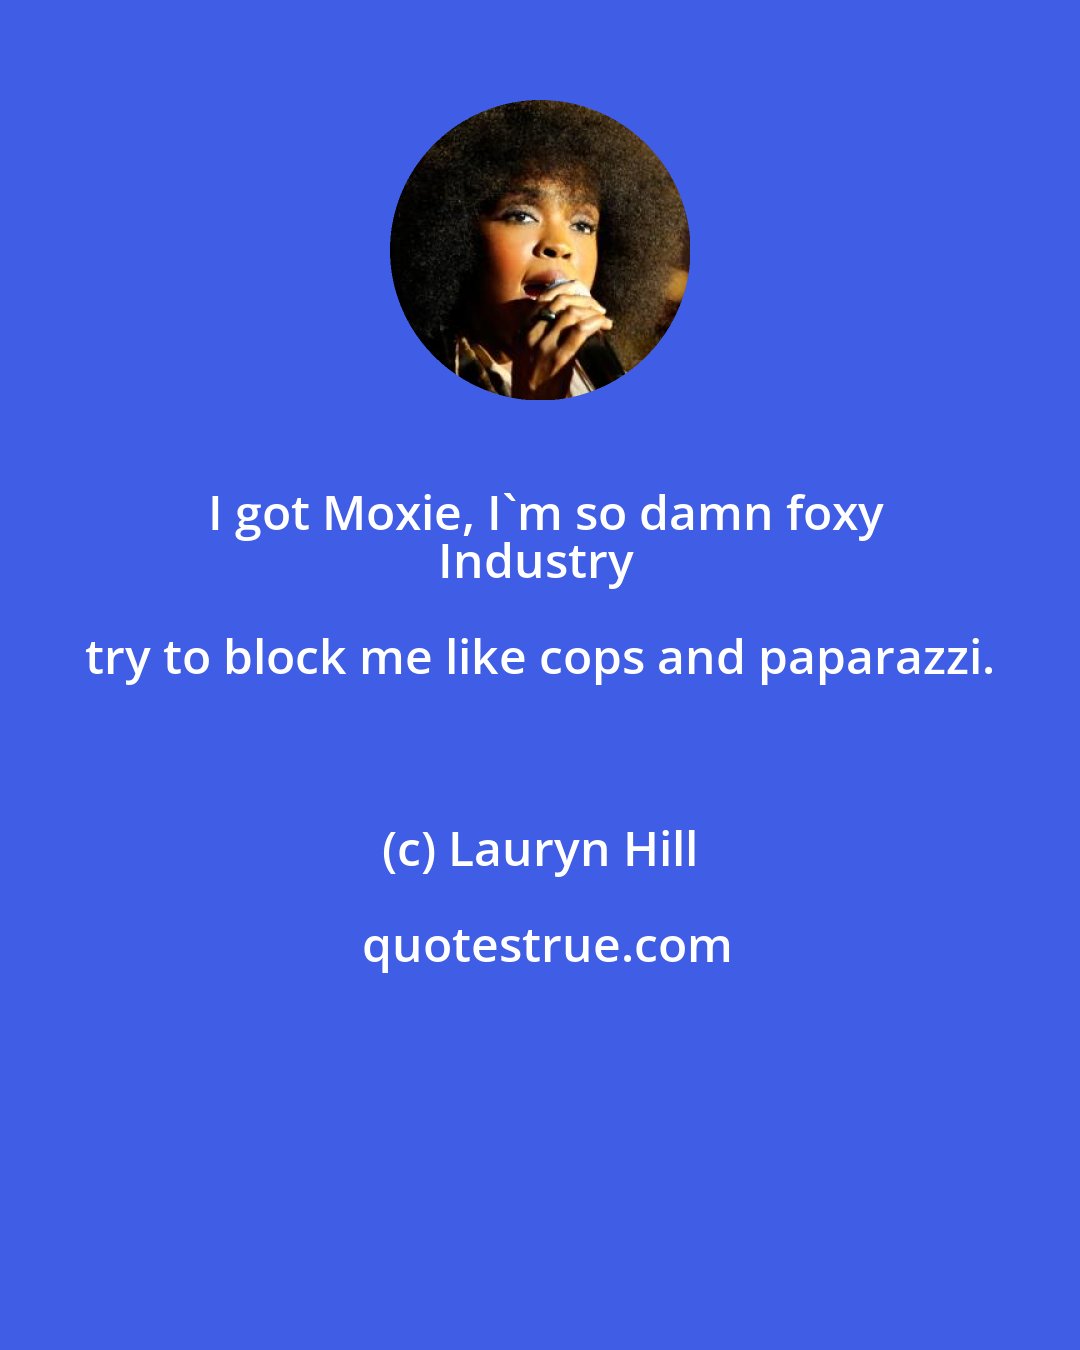 Lauryn Hill: I got Moxie, I'm so damn foxy
Industry try to block me like cops and paparazzi.